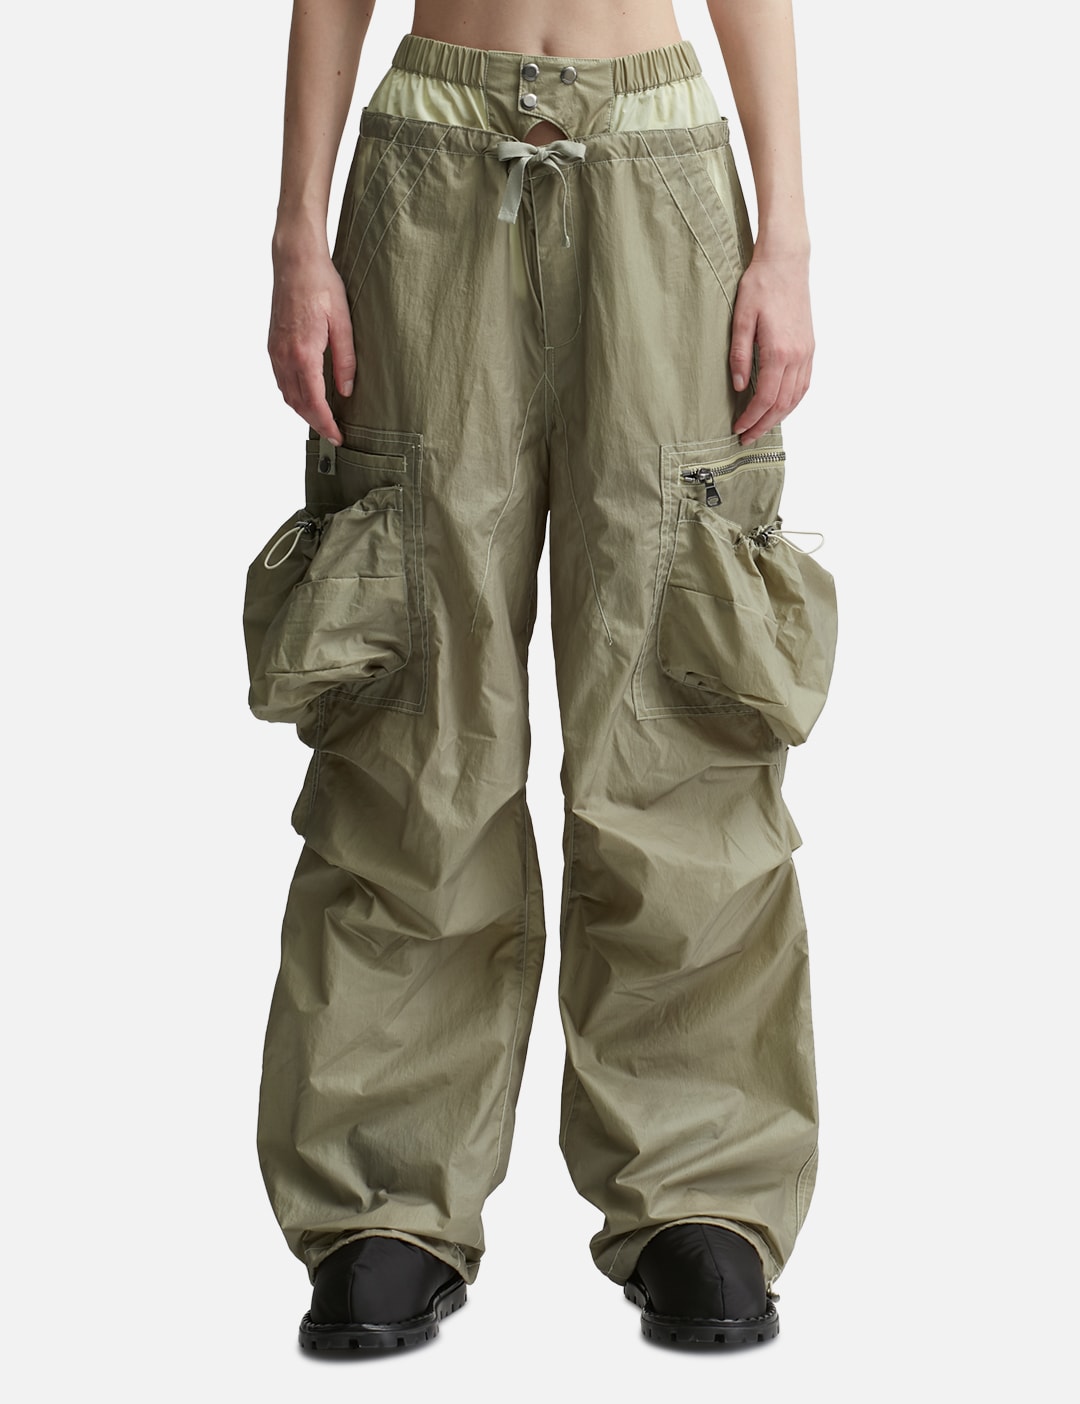 Hyein Seo - LOW-RISE PANTS  HBX - Globally Curated Fashion and Lifestyle  by Hypebeast